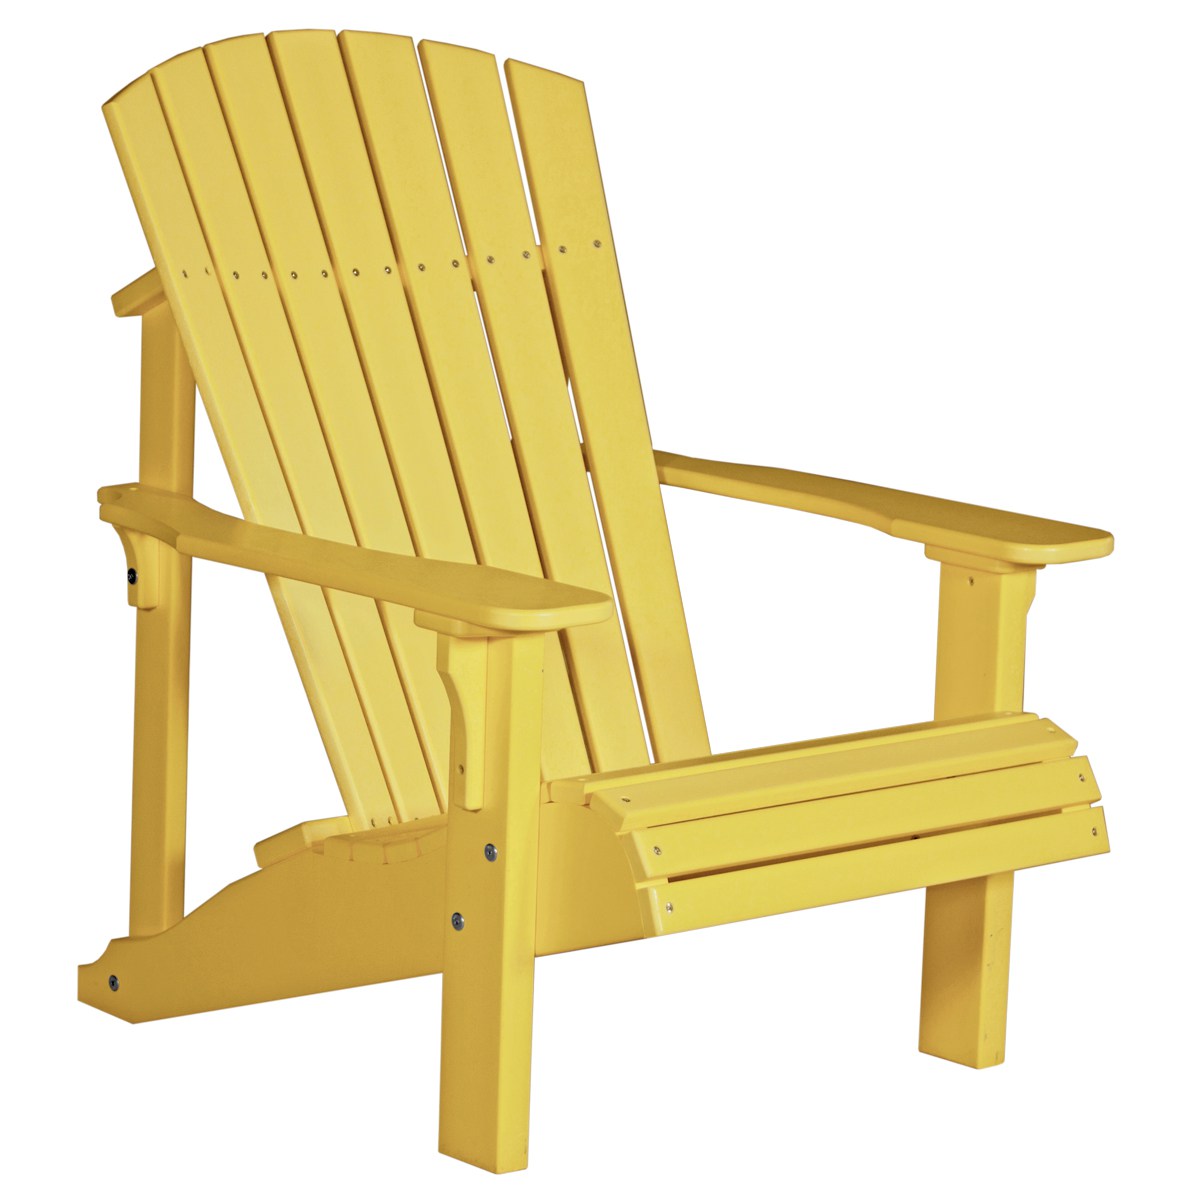 Deluxe Adirondack Chair Recycled, Plastic Wood Adirondack Chairs Canada